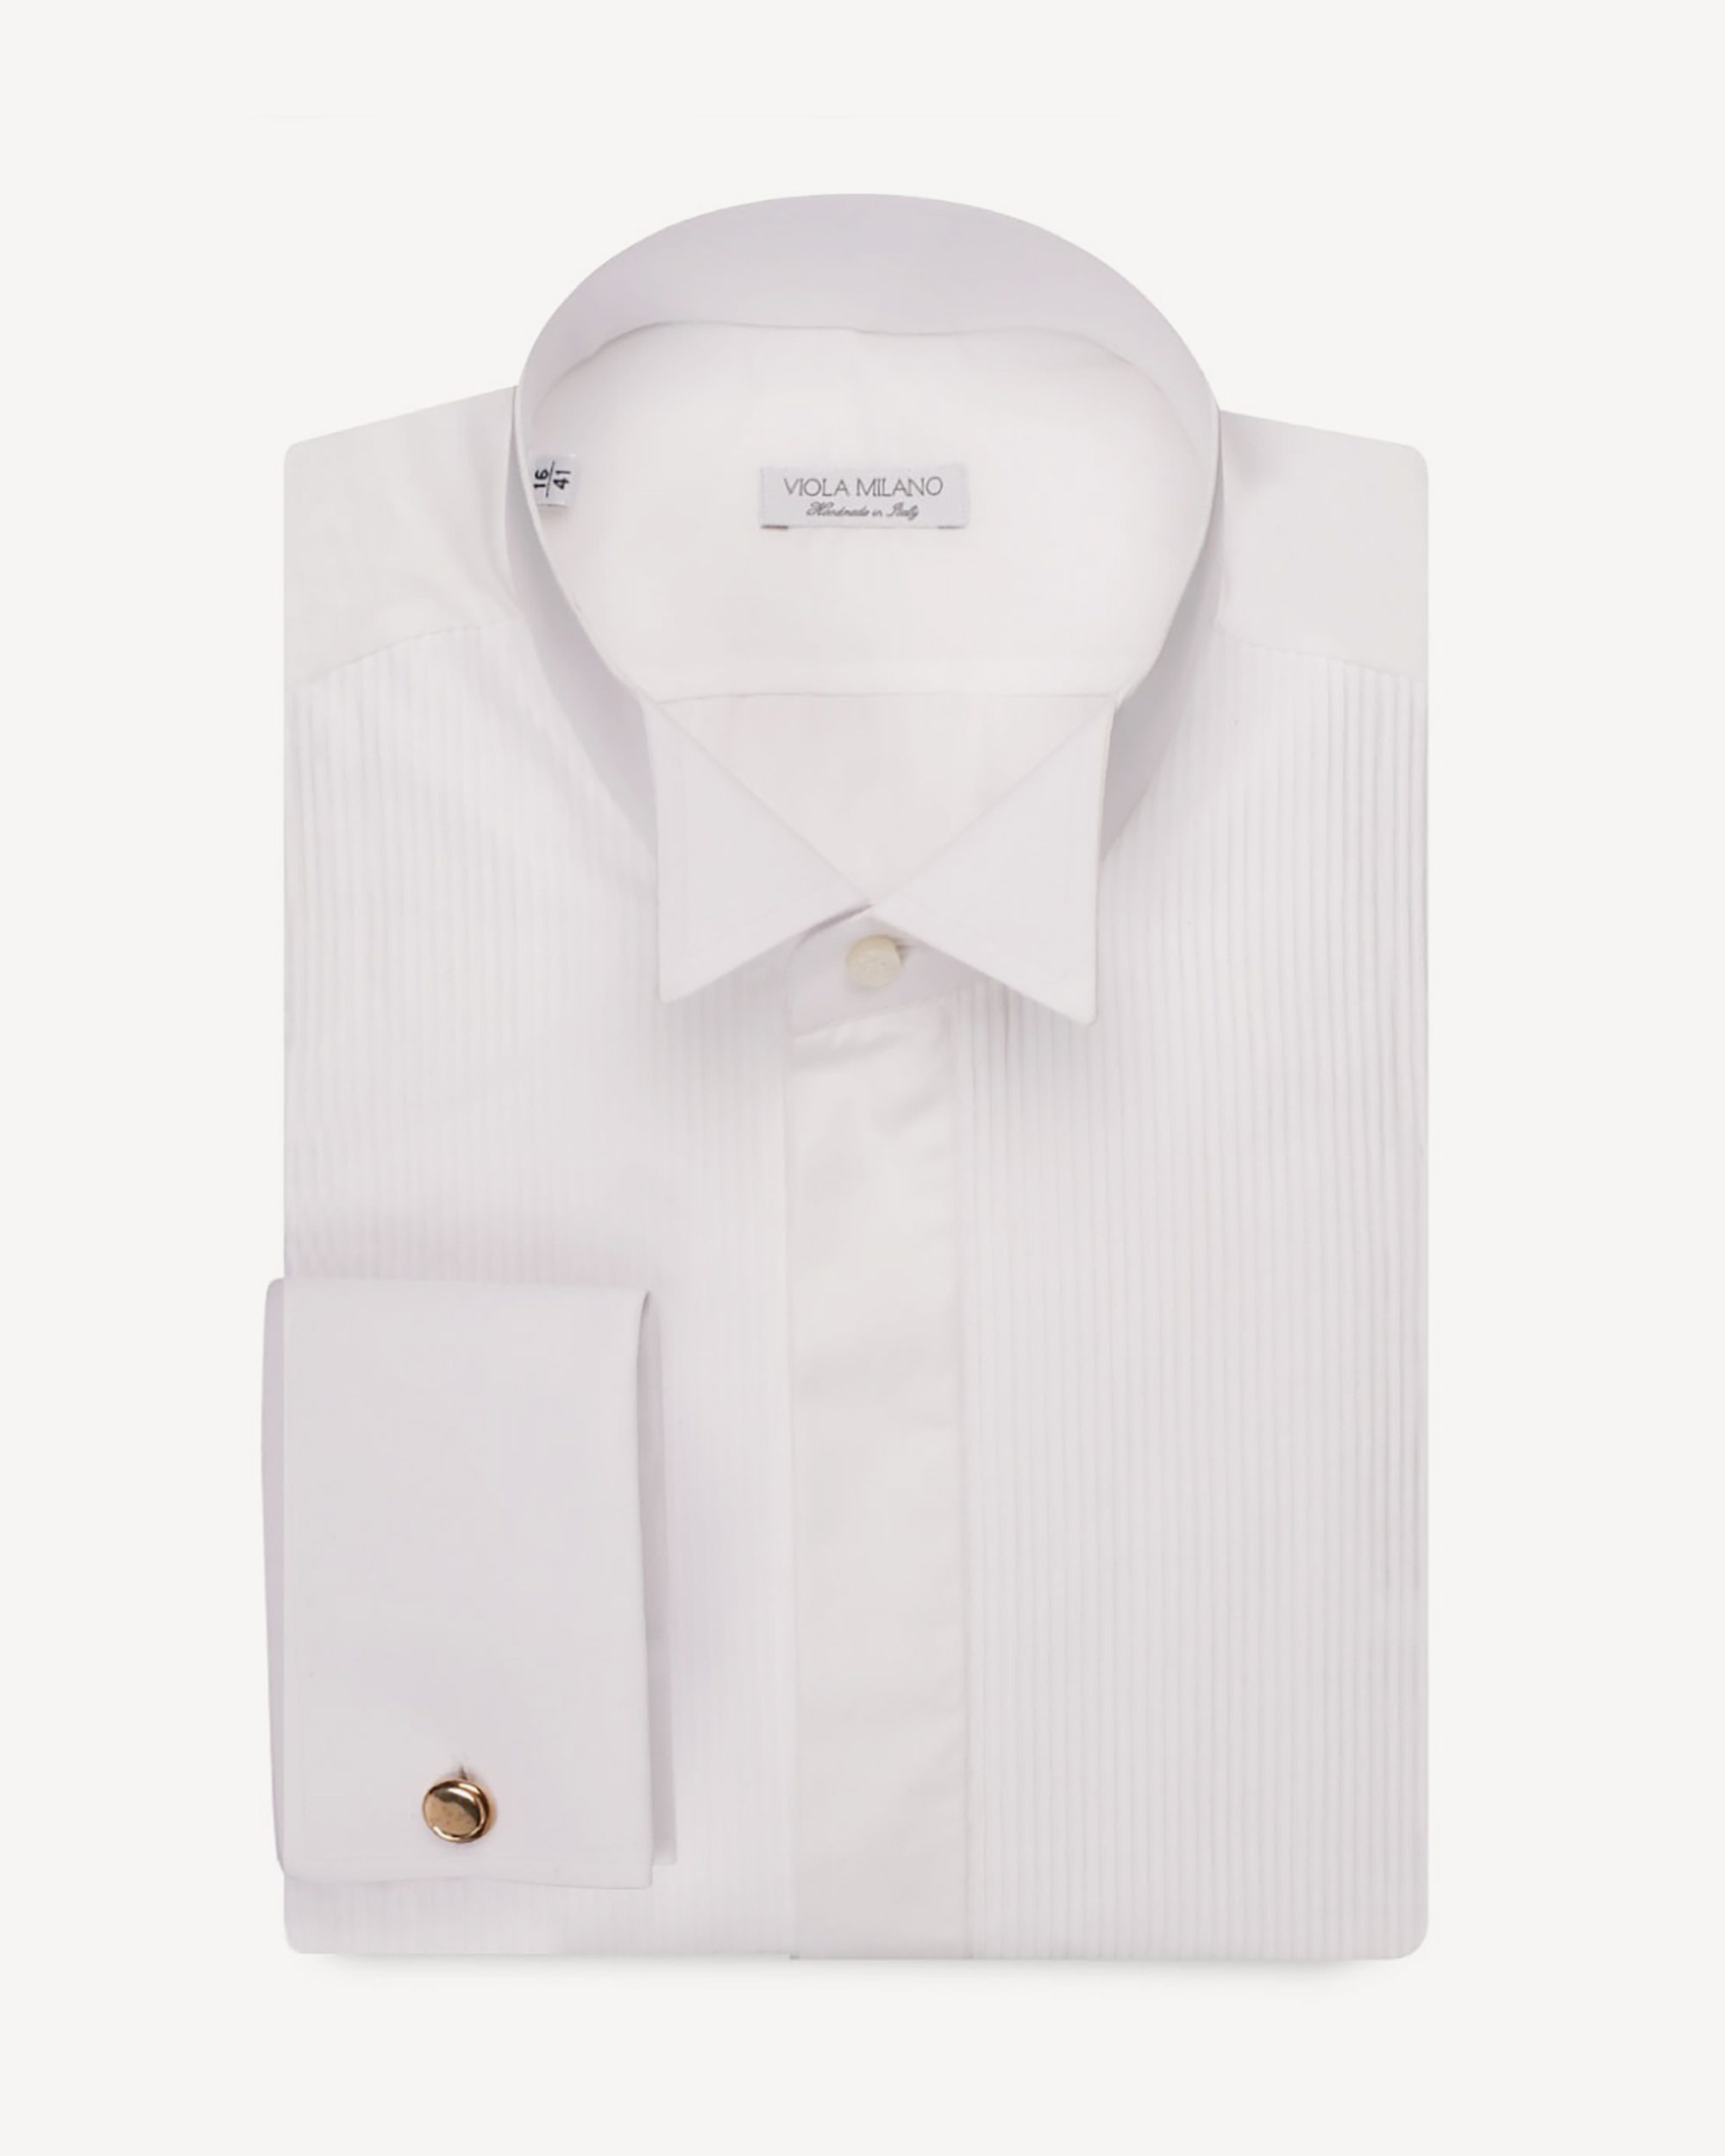 WHITE COTTON DRESS SHIRT WITH WING COLLAR AND DOUBLE CUFFS